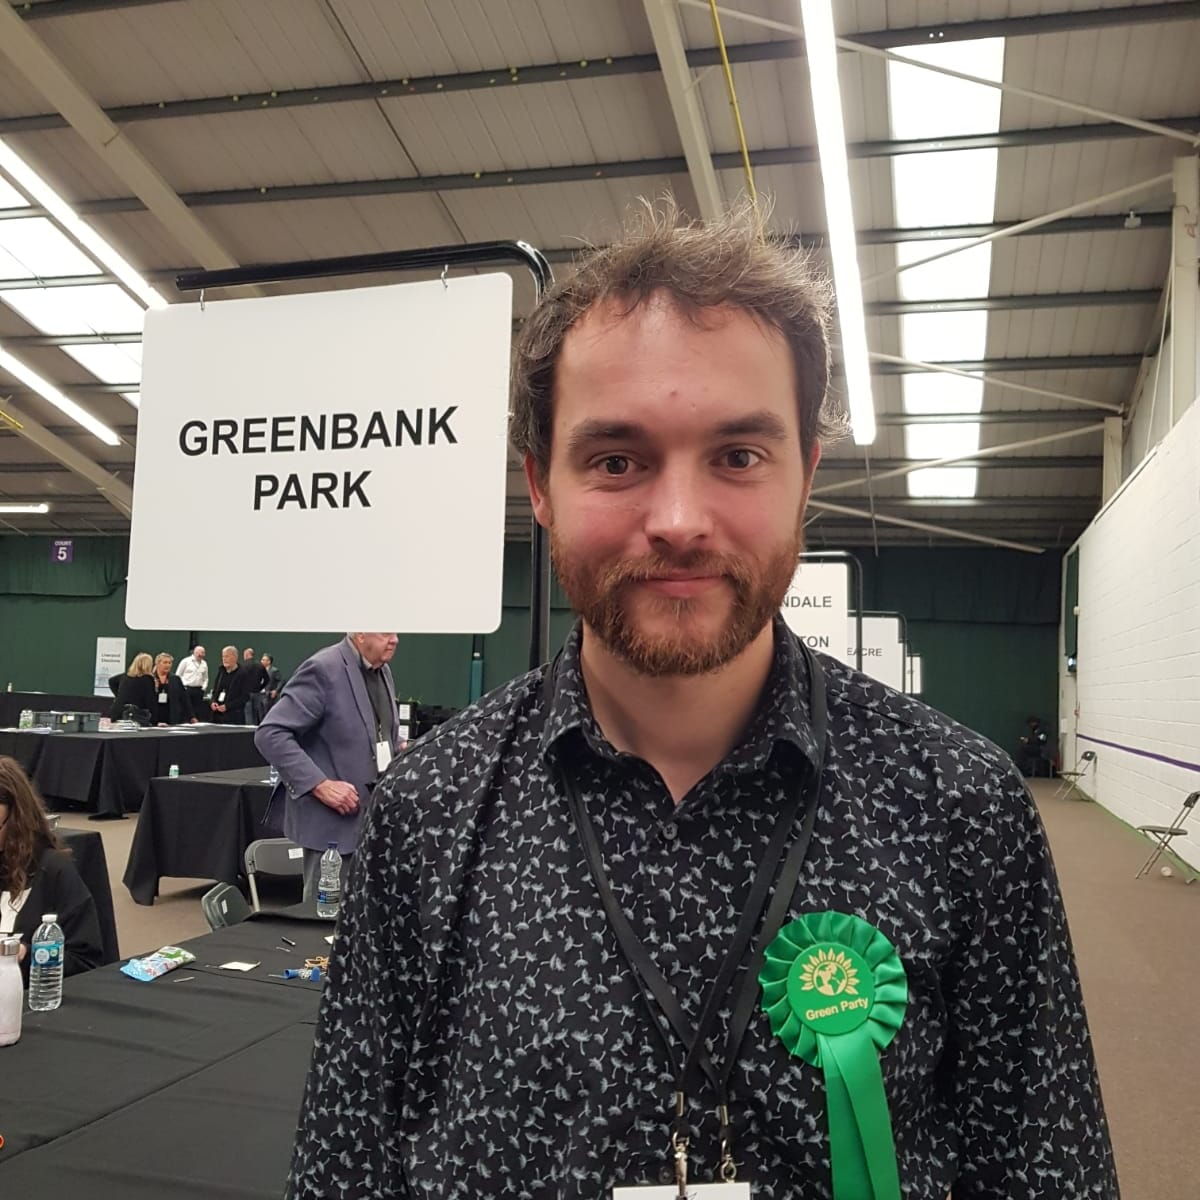 I am delighted to announce that I have just been elected as the councillor for Greenbank Park. Thank you to everyone who voted for me, and also to the people who didn't vote for me, I will do my best to represent all your interests.